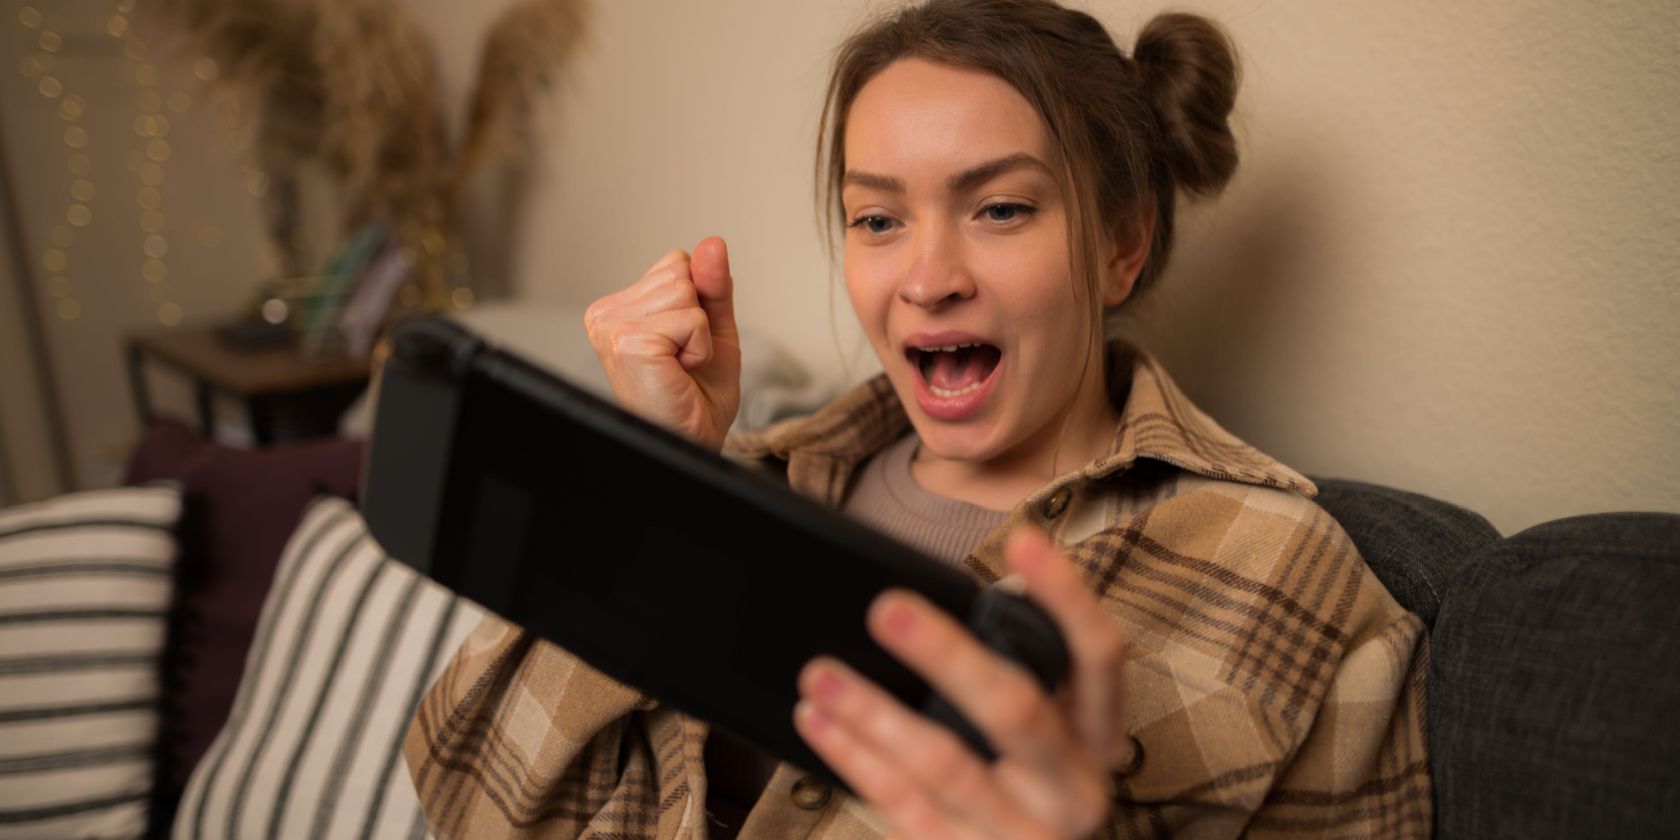 Excited girl holding up fist while playing on Nintendo Switch in handheld mode